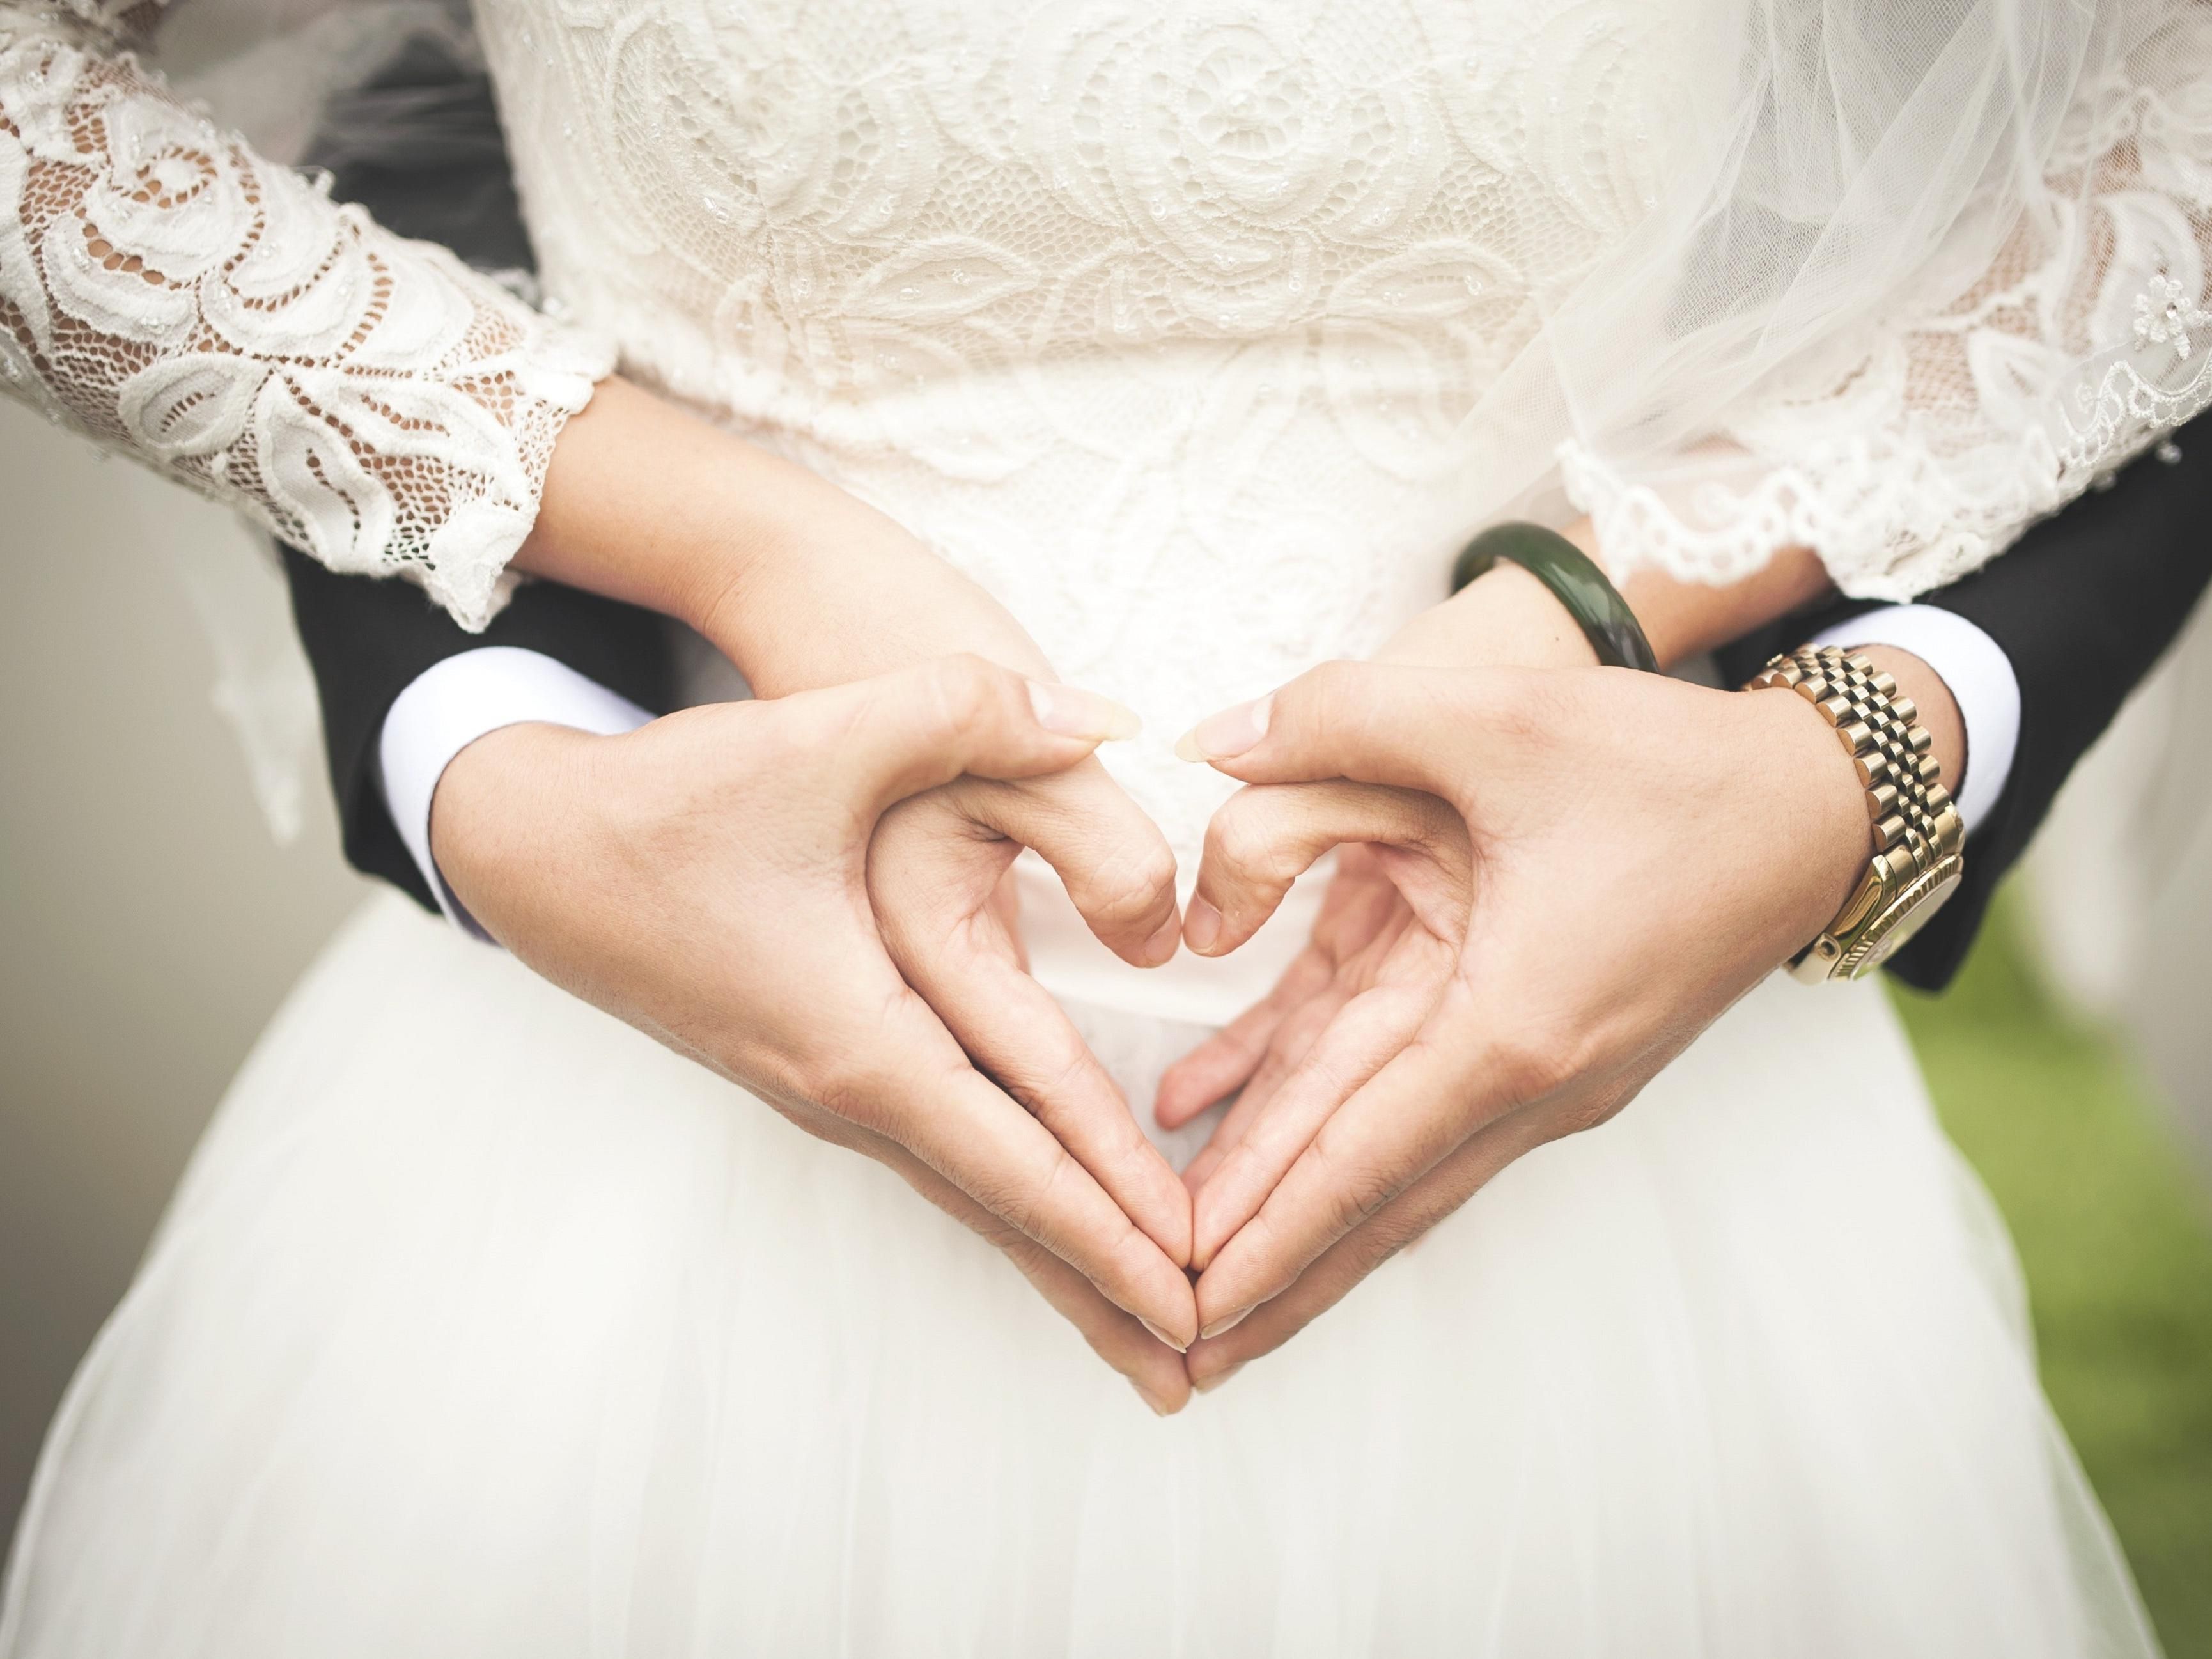 Recently Engaged? Celebrating a Quinceanera, Sweet 16, or other special event? We offer modern packages with customized options for every budget. Book at the Holiday Inn Chicago Northwest Elgin and receive up to 15% off on select packages!